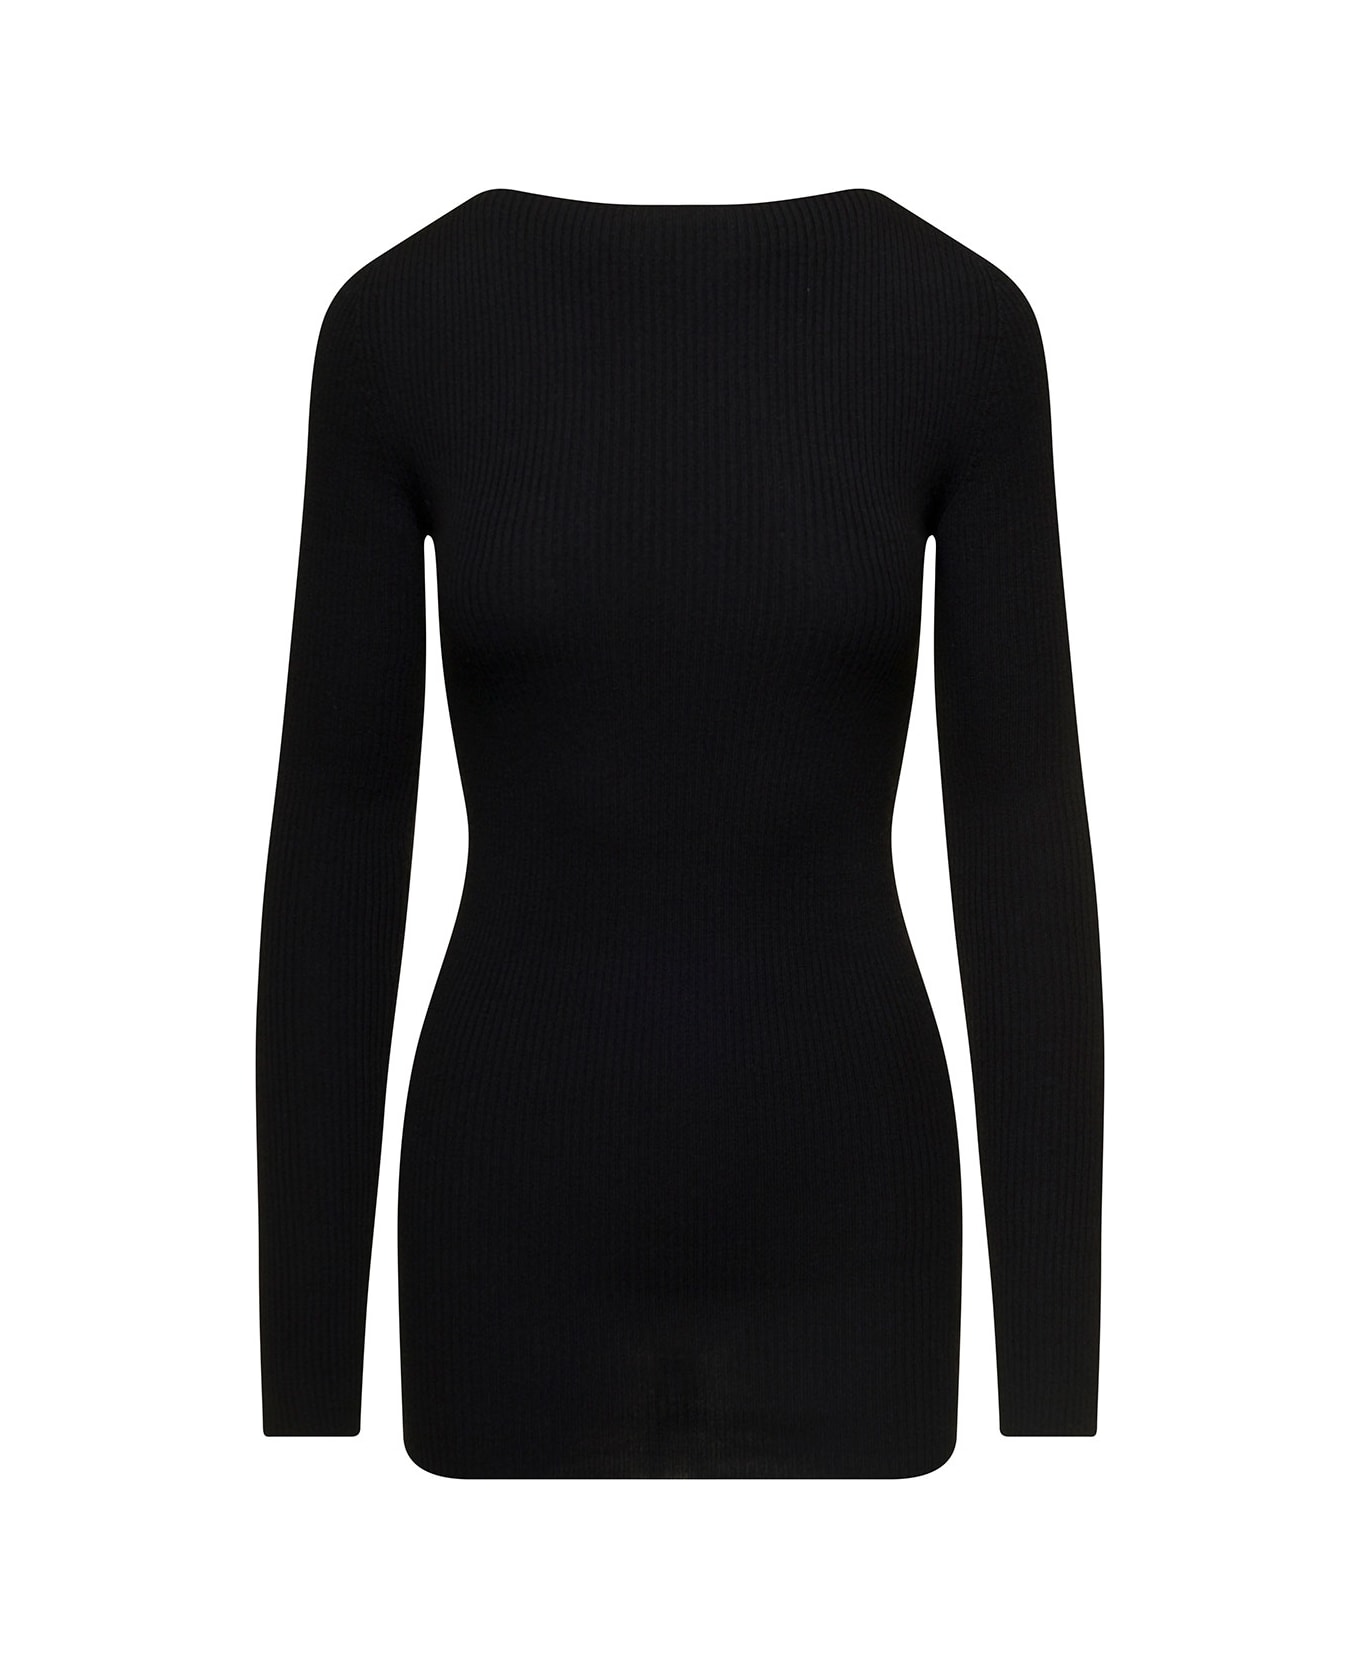 Rick Owens Long Black Ribbed Top With Round Cut-out In Wool Woman - Black